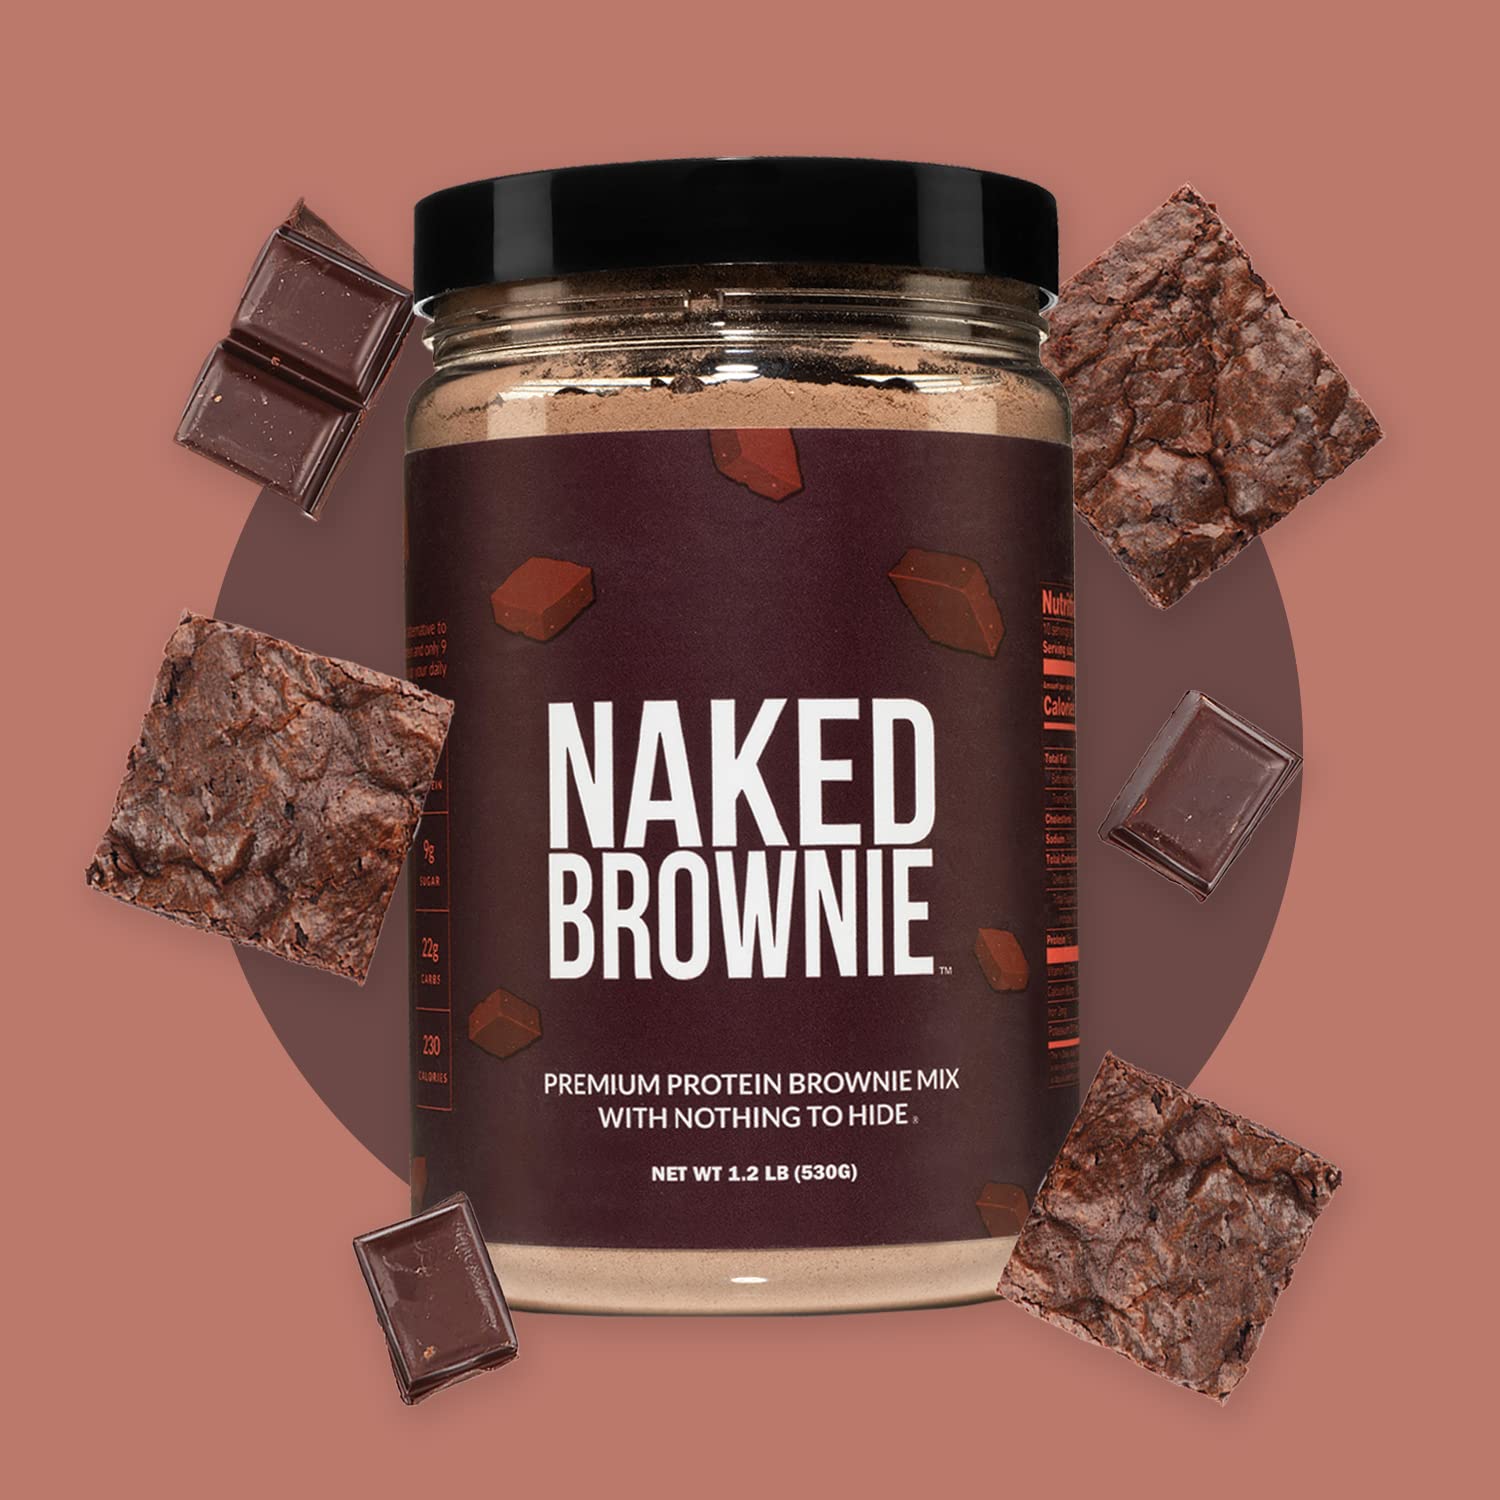 Naked Brownie - High Protein Brownie Mix, No Artificial Sweeteners, 15g Protein, Only 9g Sugar, Gluten Free, Non-GMO, No Soy - 1.2 LB : Grocery & Gourmet Food